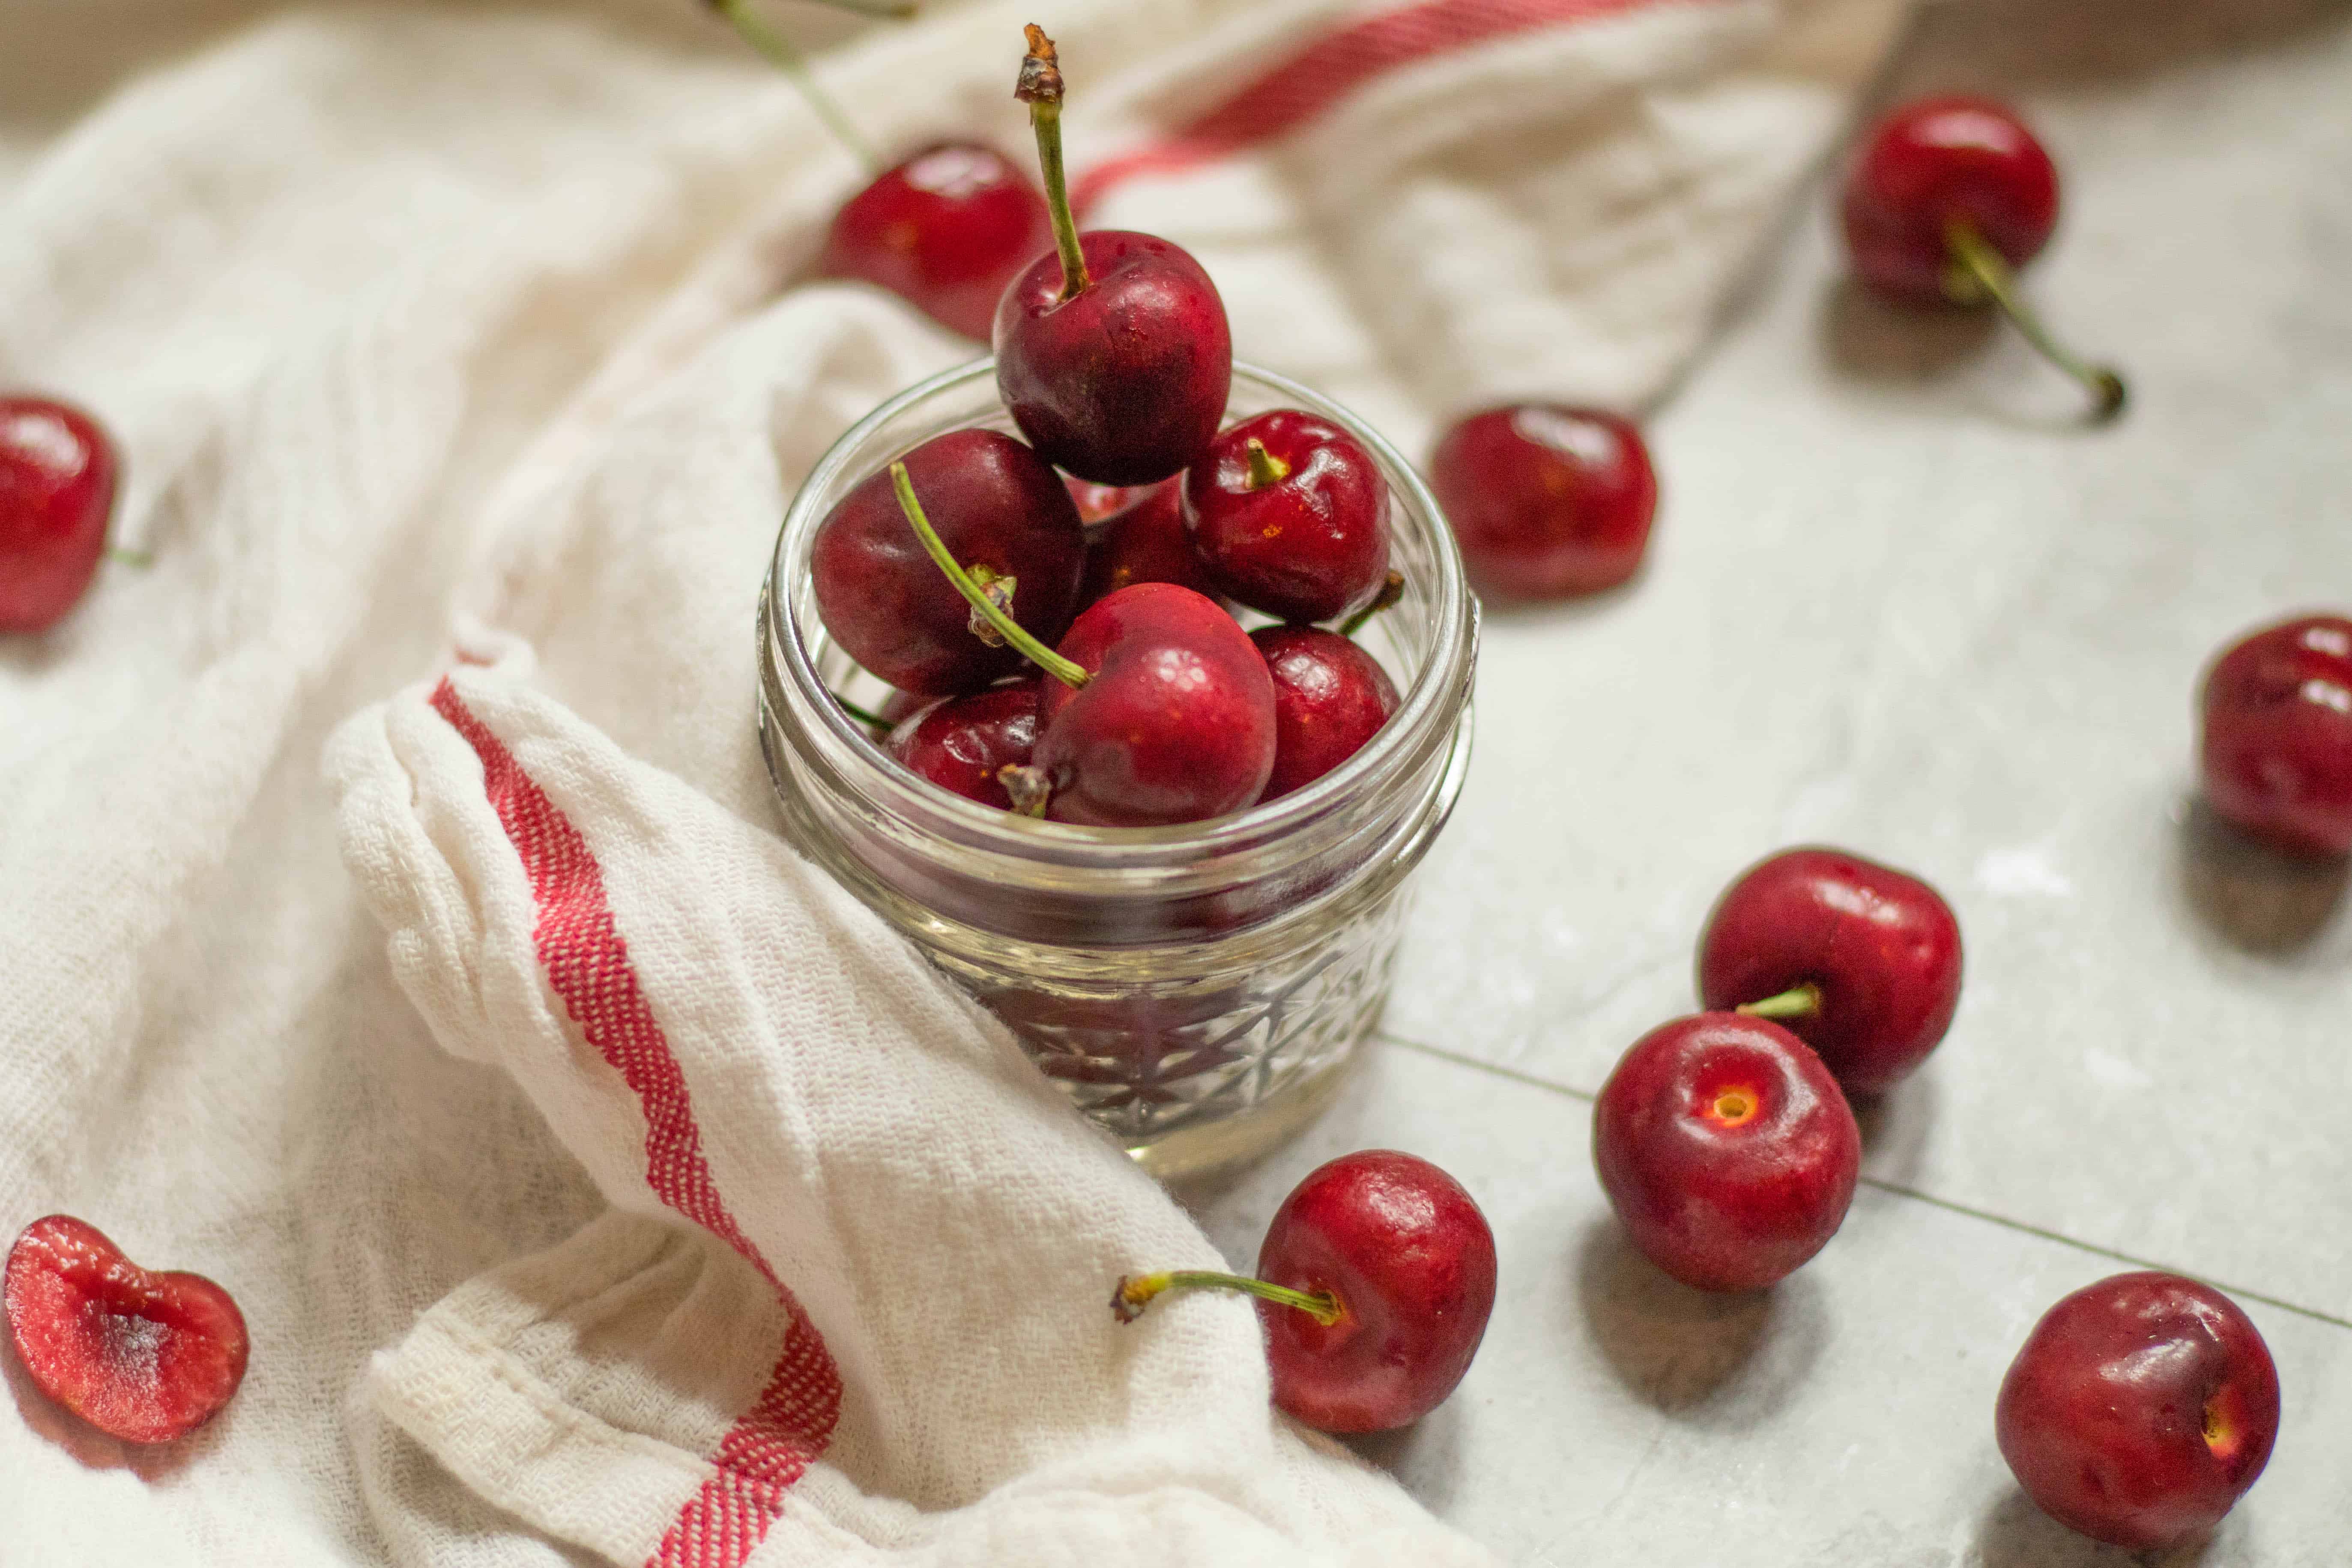 cherries piled in a small mason jar with other cherries scattered about on a towel.